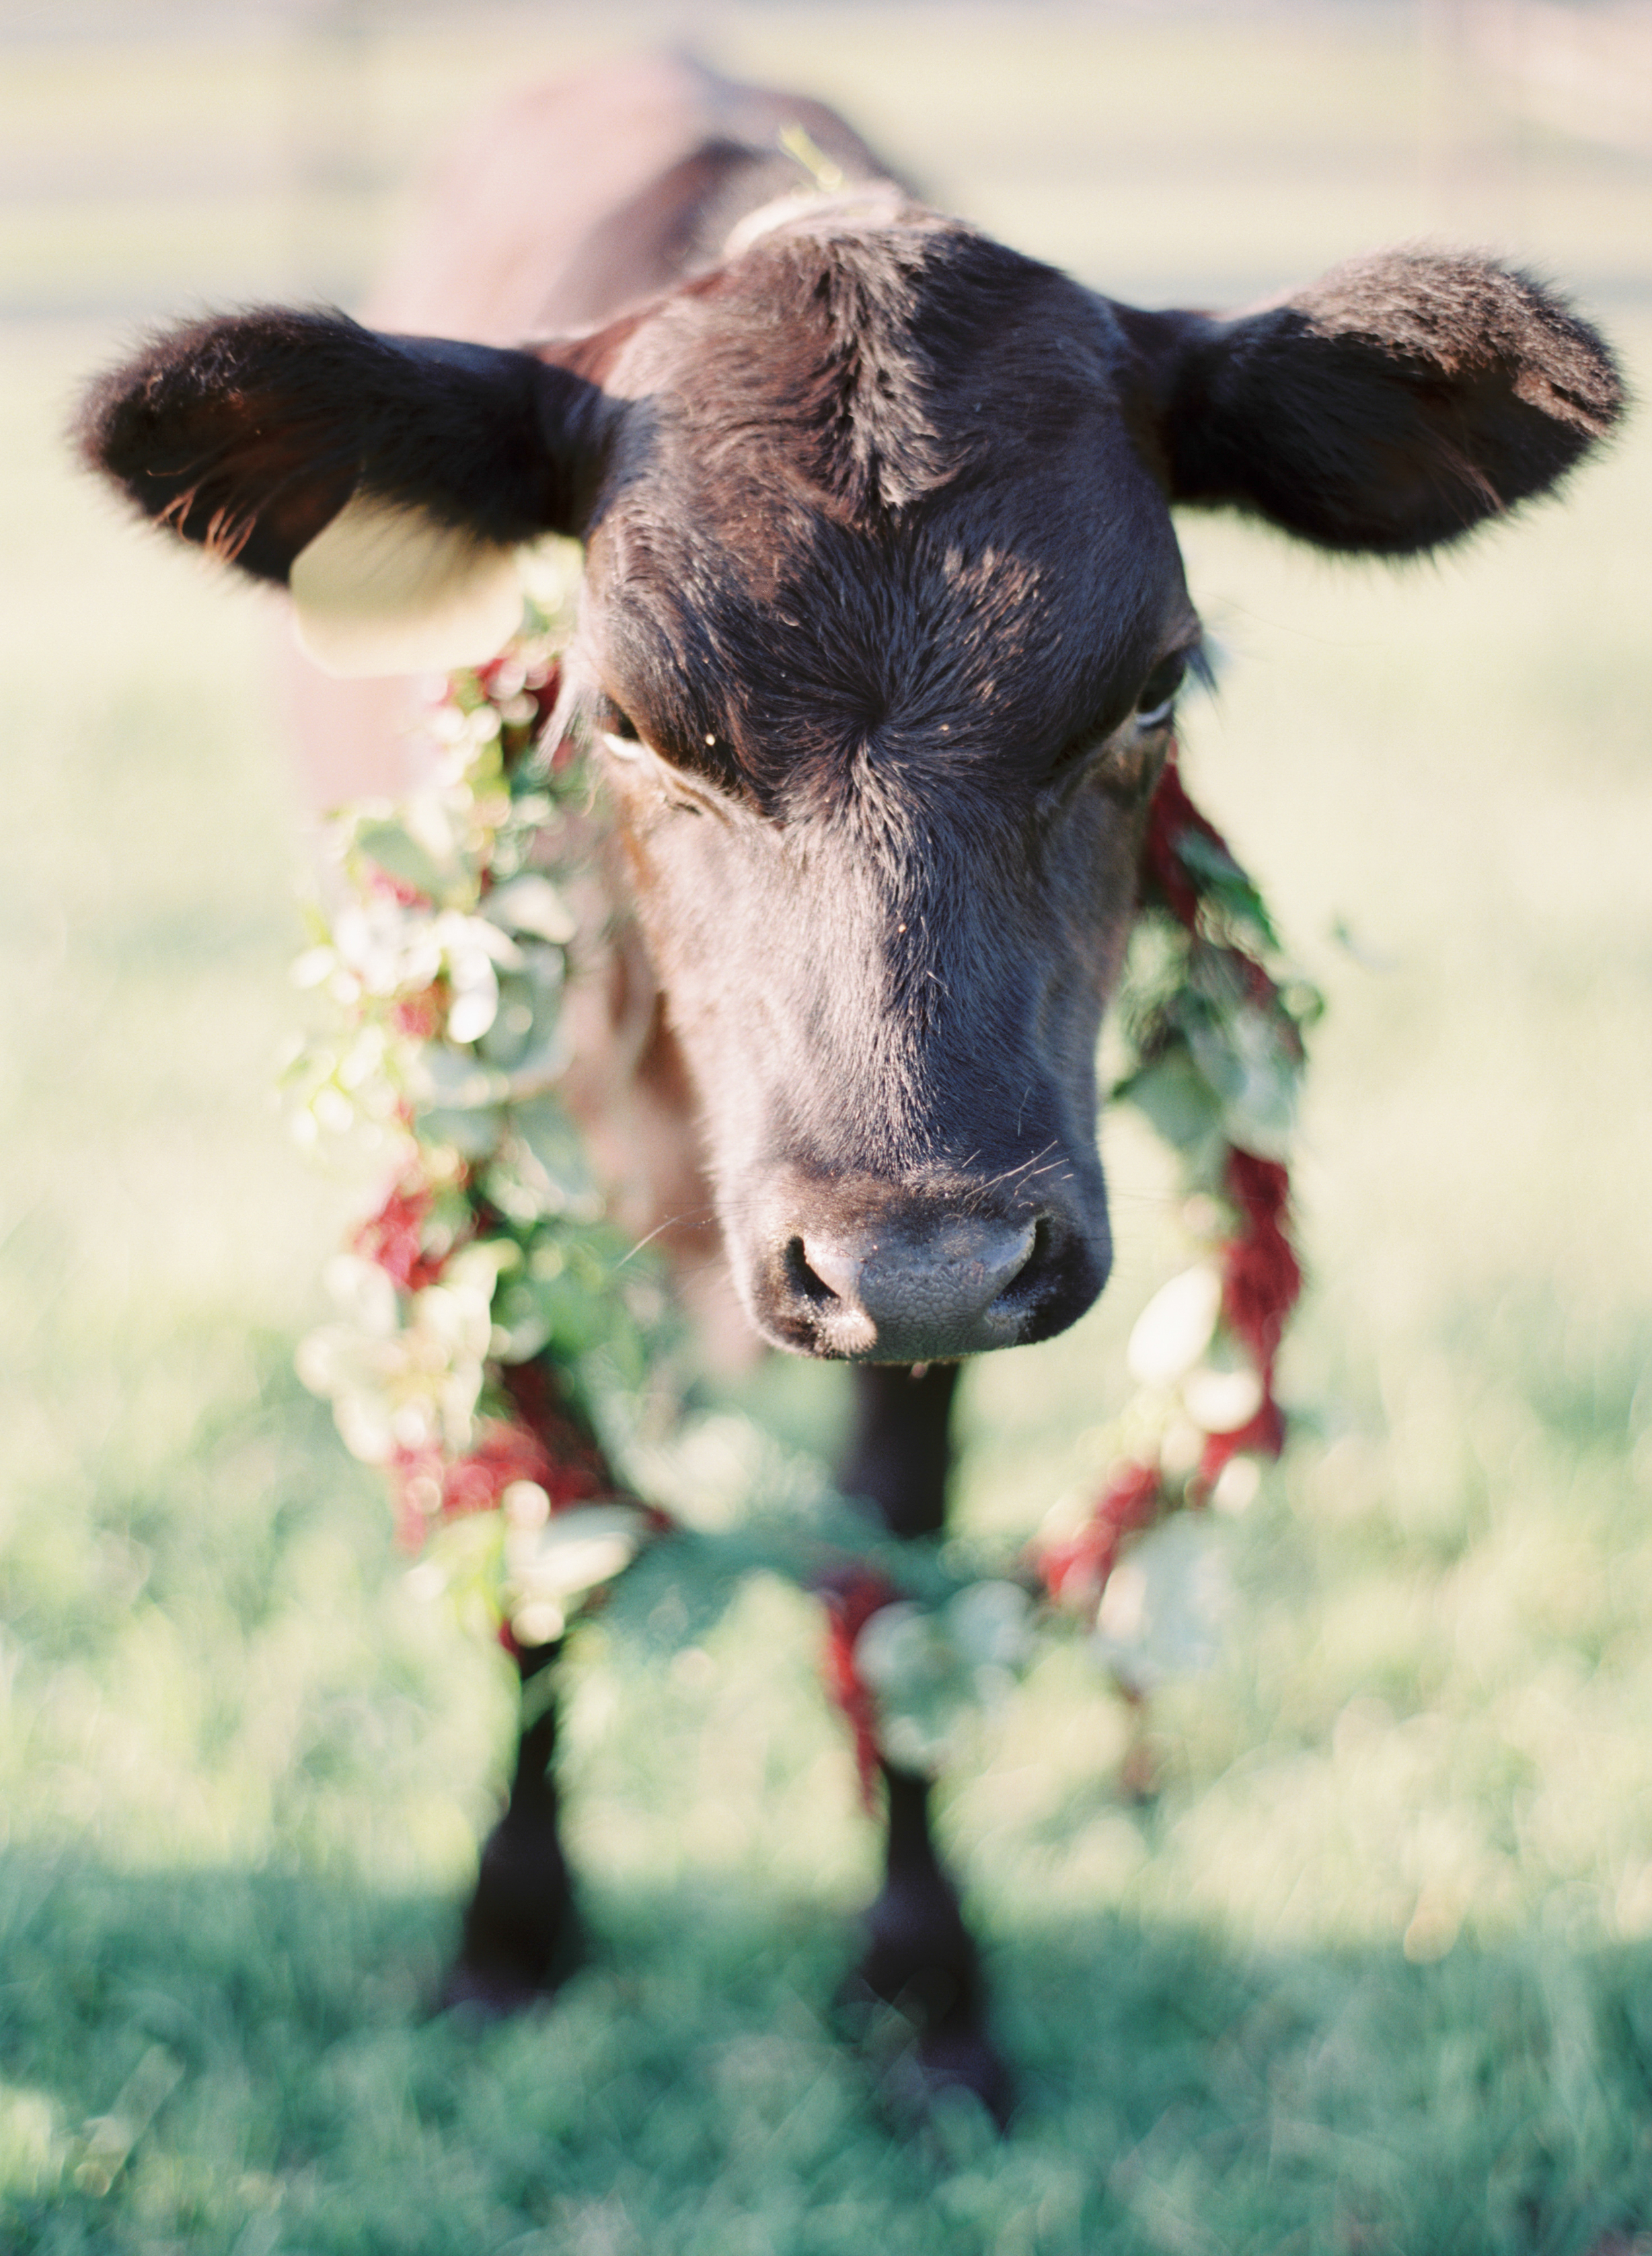 Cow in Nashville with Floral Wreath